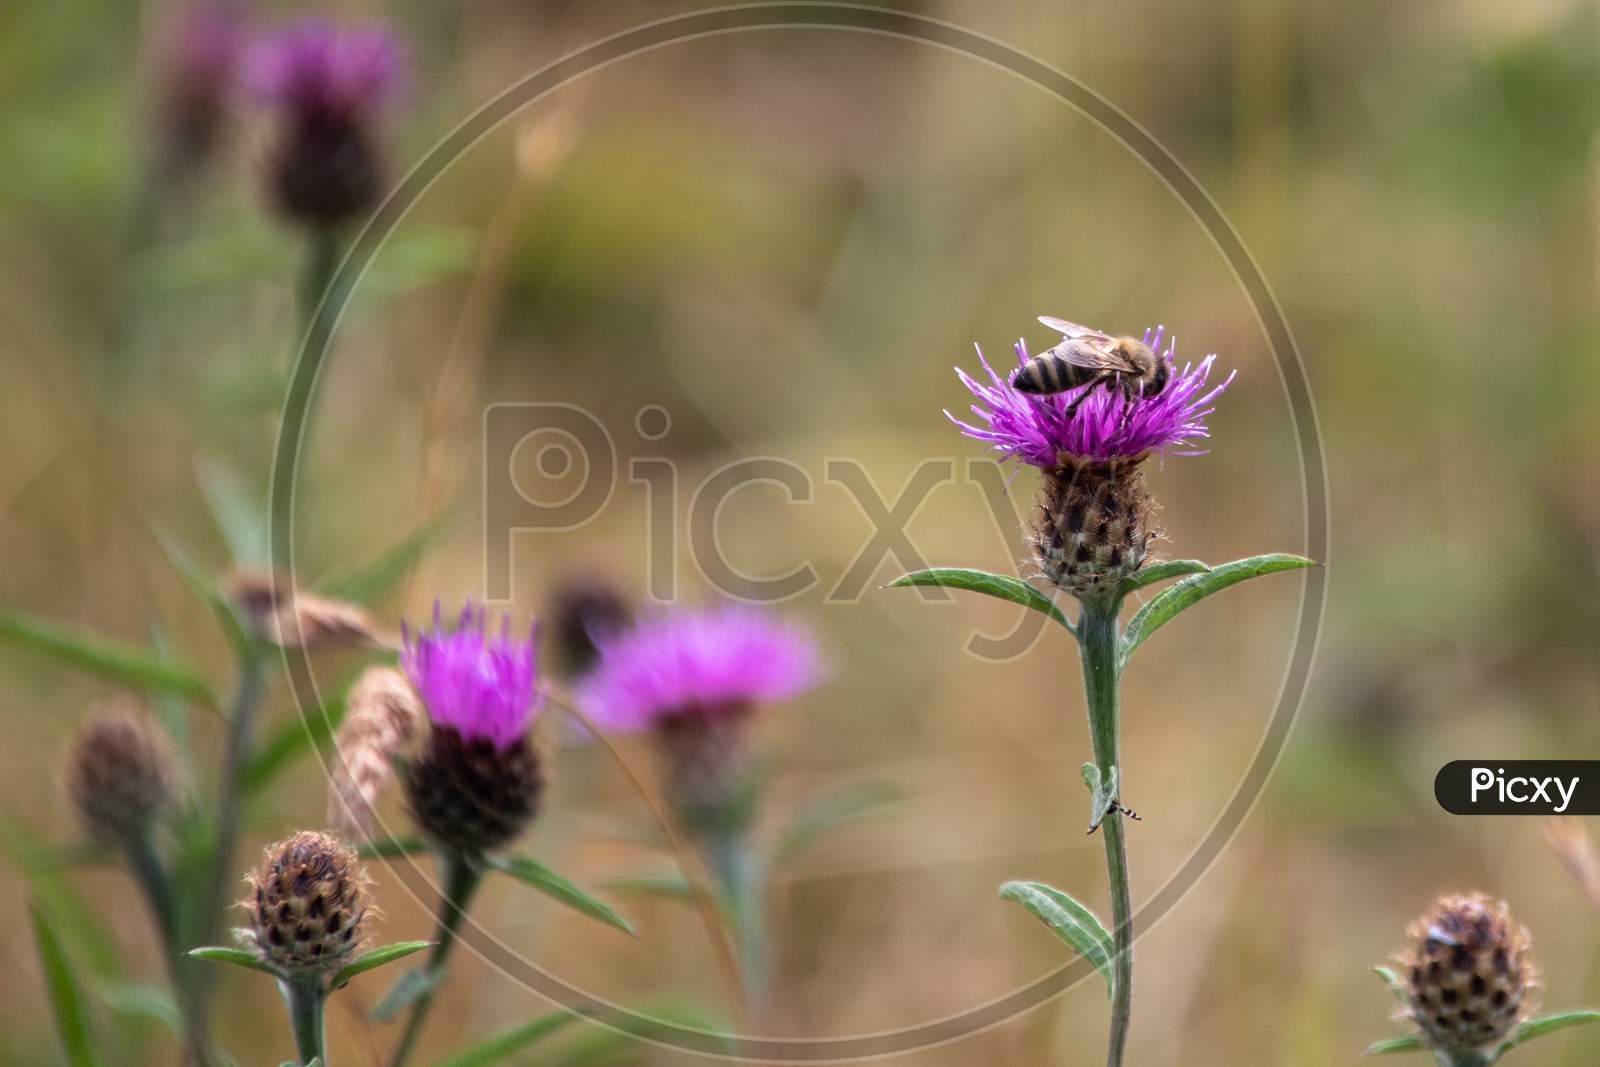 Western Honey Bee (Apis Mellifera) Gathering Pollen From A Thistle